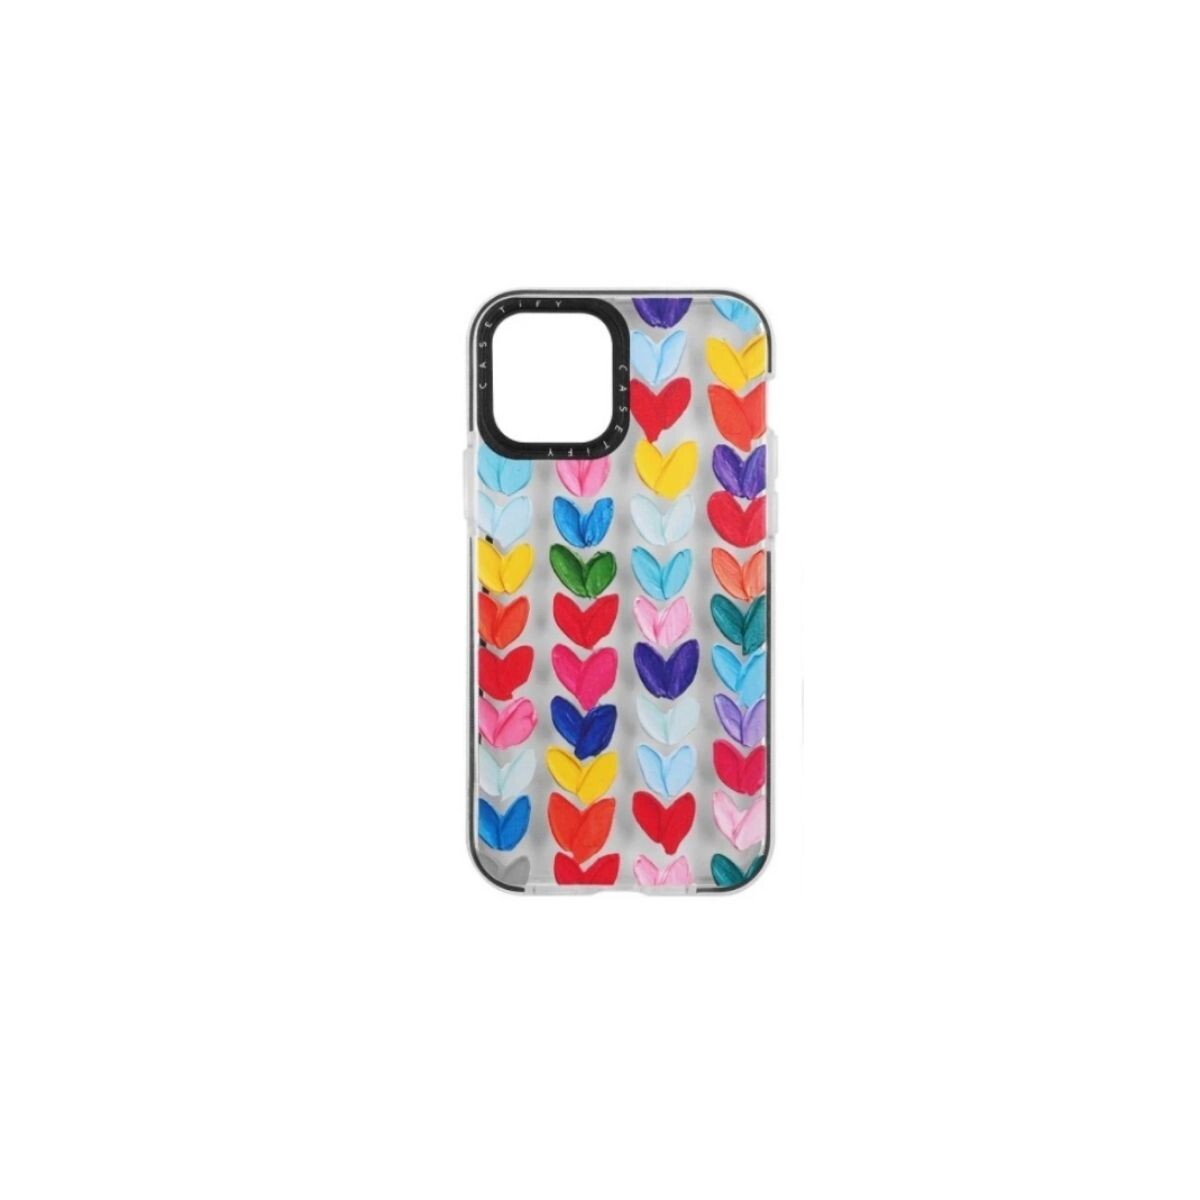 Protector Casetify Love Para Iphone 11 Pro Max 